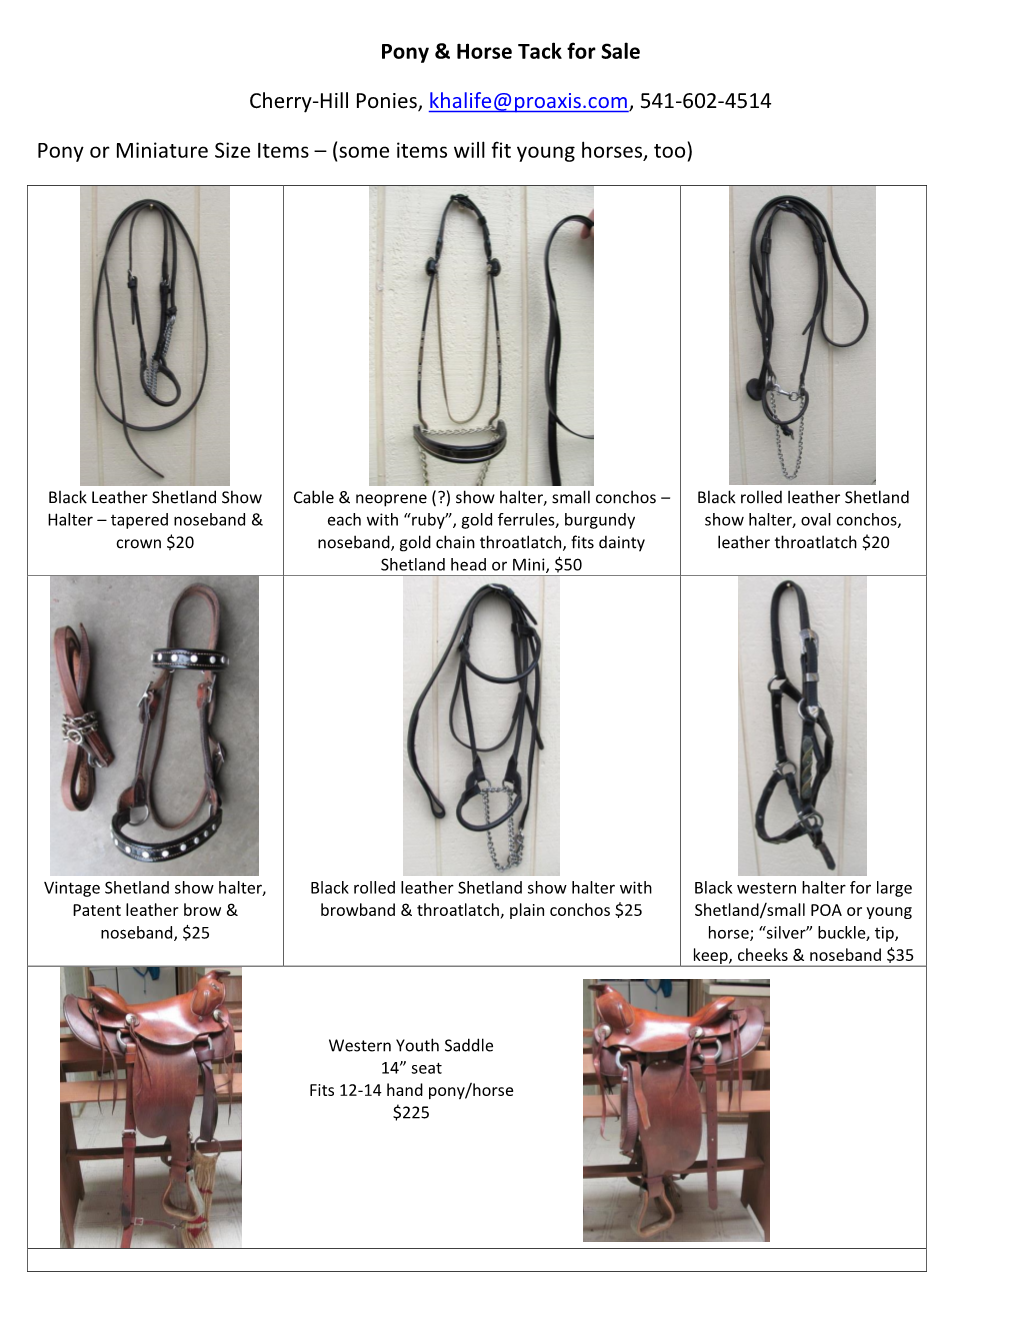 Pony & Horse Tack for Sale Cherry-Hill Ponies, Khalife@Proaxis